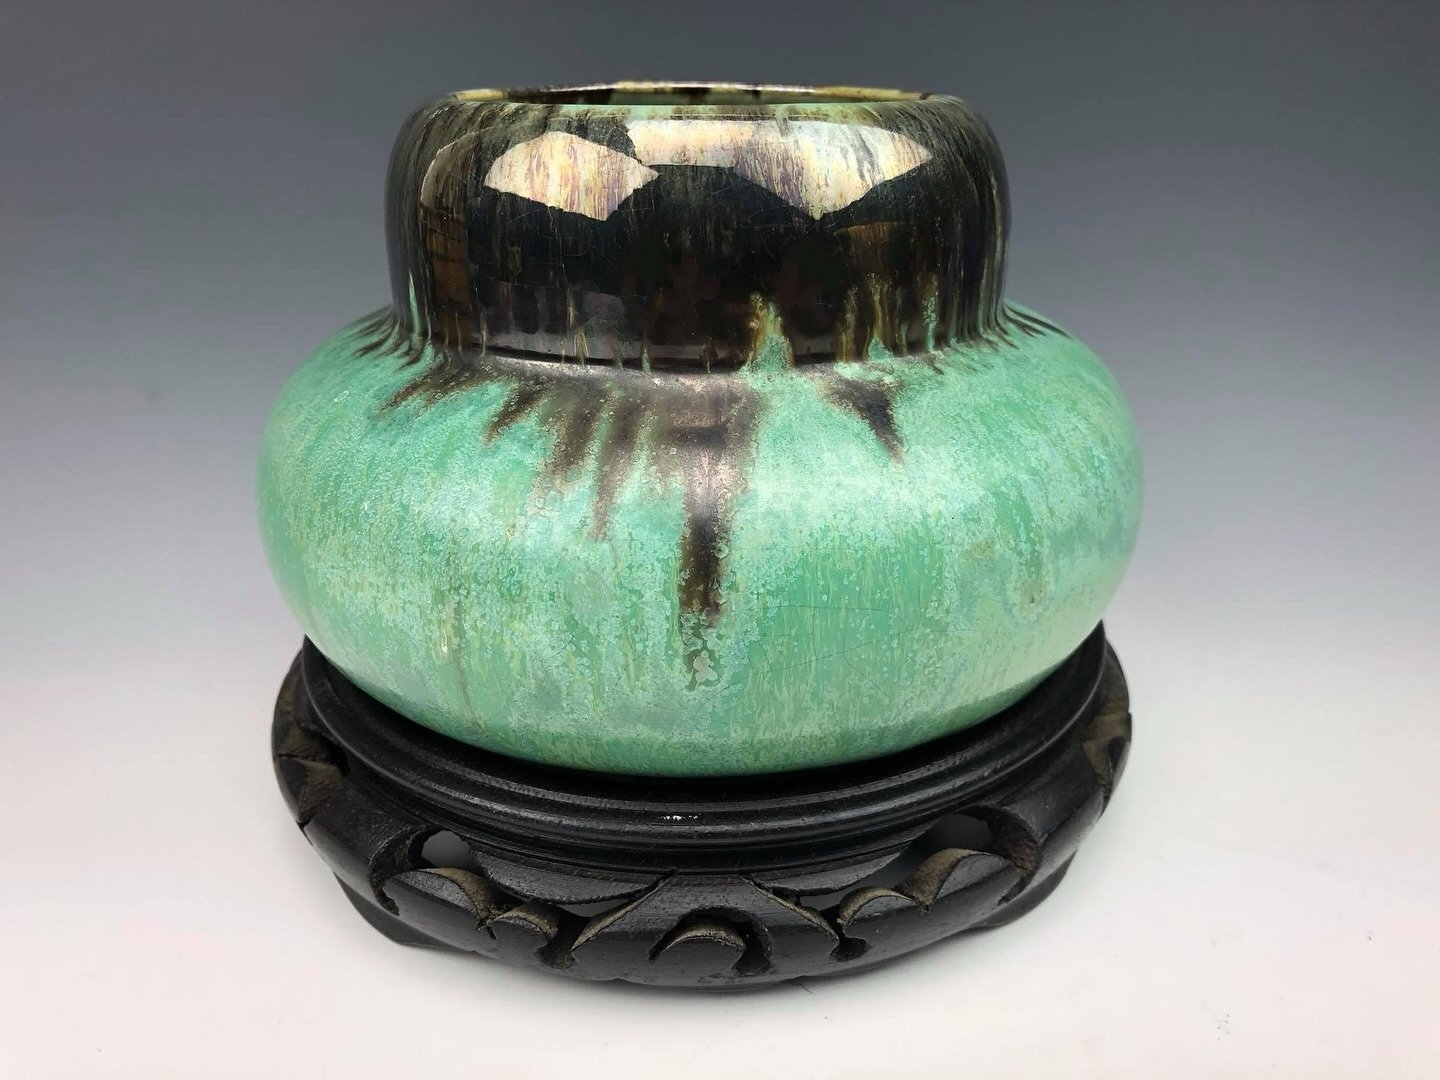 A double-gourd form vase in a black flamb&eacute; over a green crystalline glaze. Fulper Pottery of Flemington, New Jersey. Circa 1915.

The Drake Hall Collection